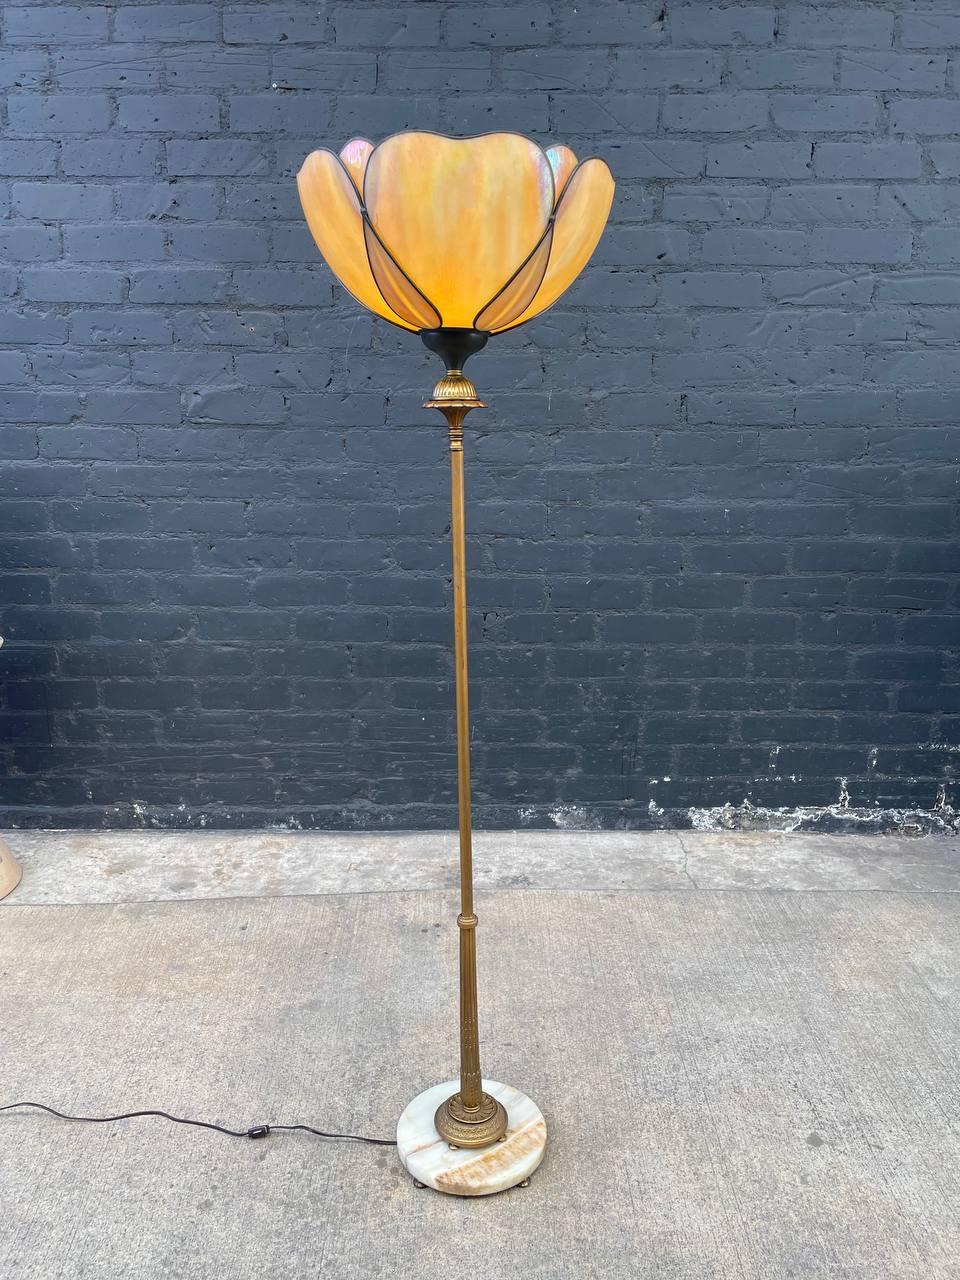 Newly Rewired

Materials: Brass, Resin Plastic Shade